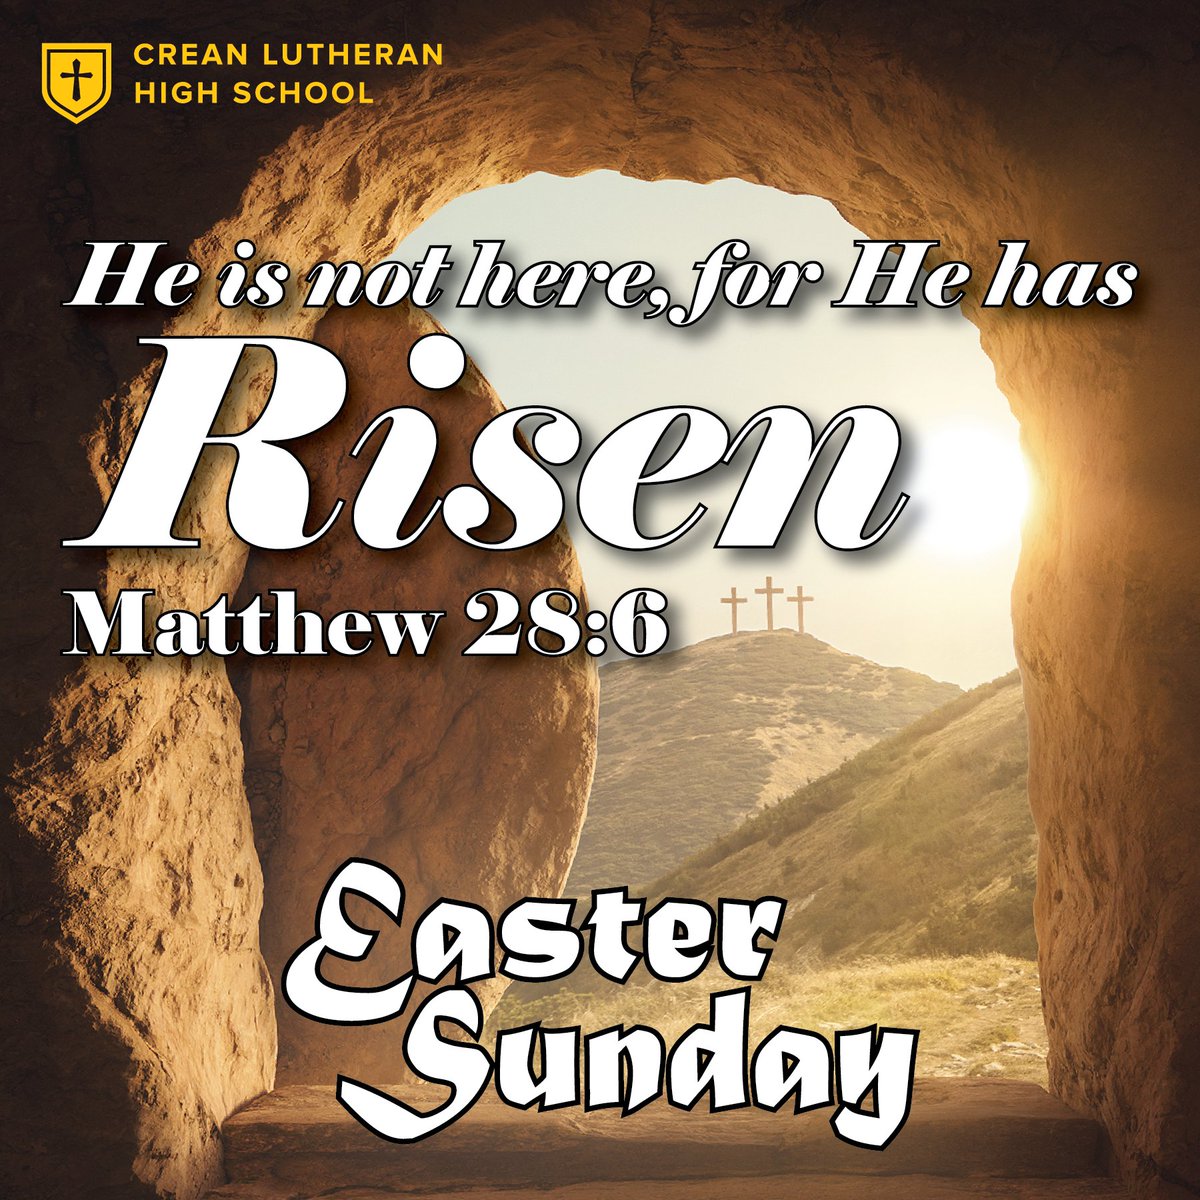 On Easter morning, early hasten to Jesus' tomb, stoop down, and see that Jesus is not there. Death is dead. JESUS LIVES! HE IS RISEN! ALLELUIA! John 20:1-18